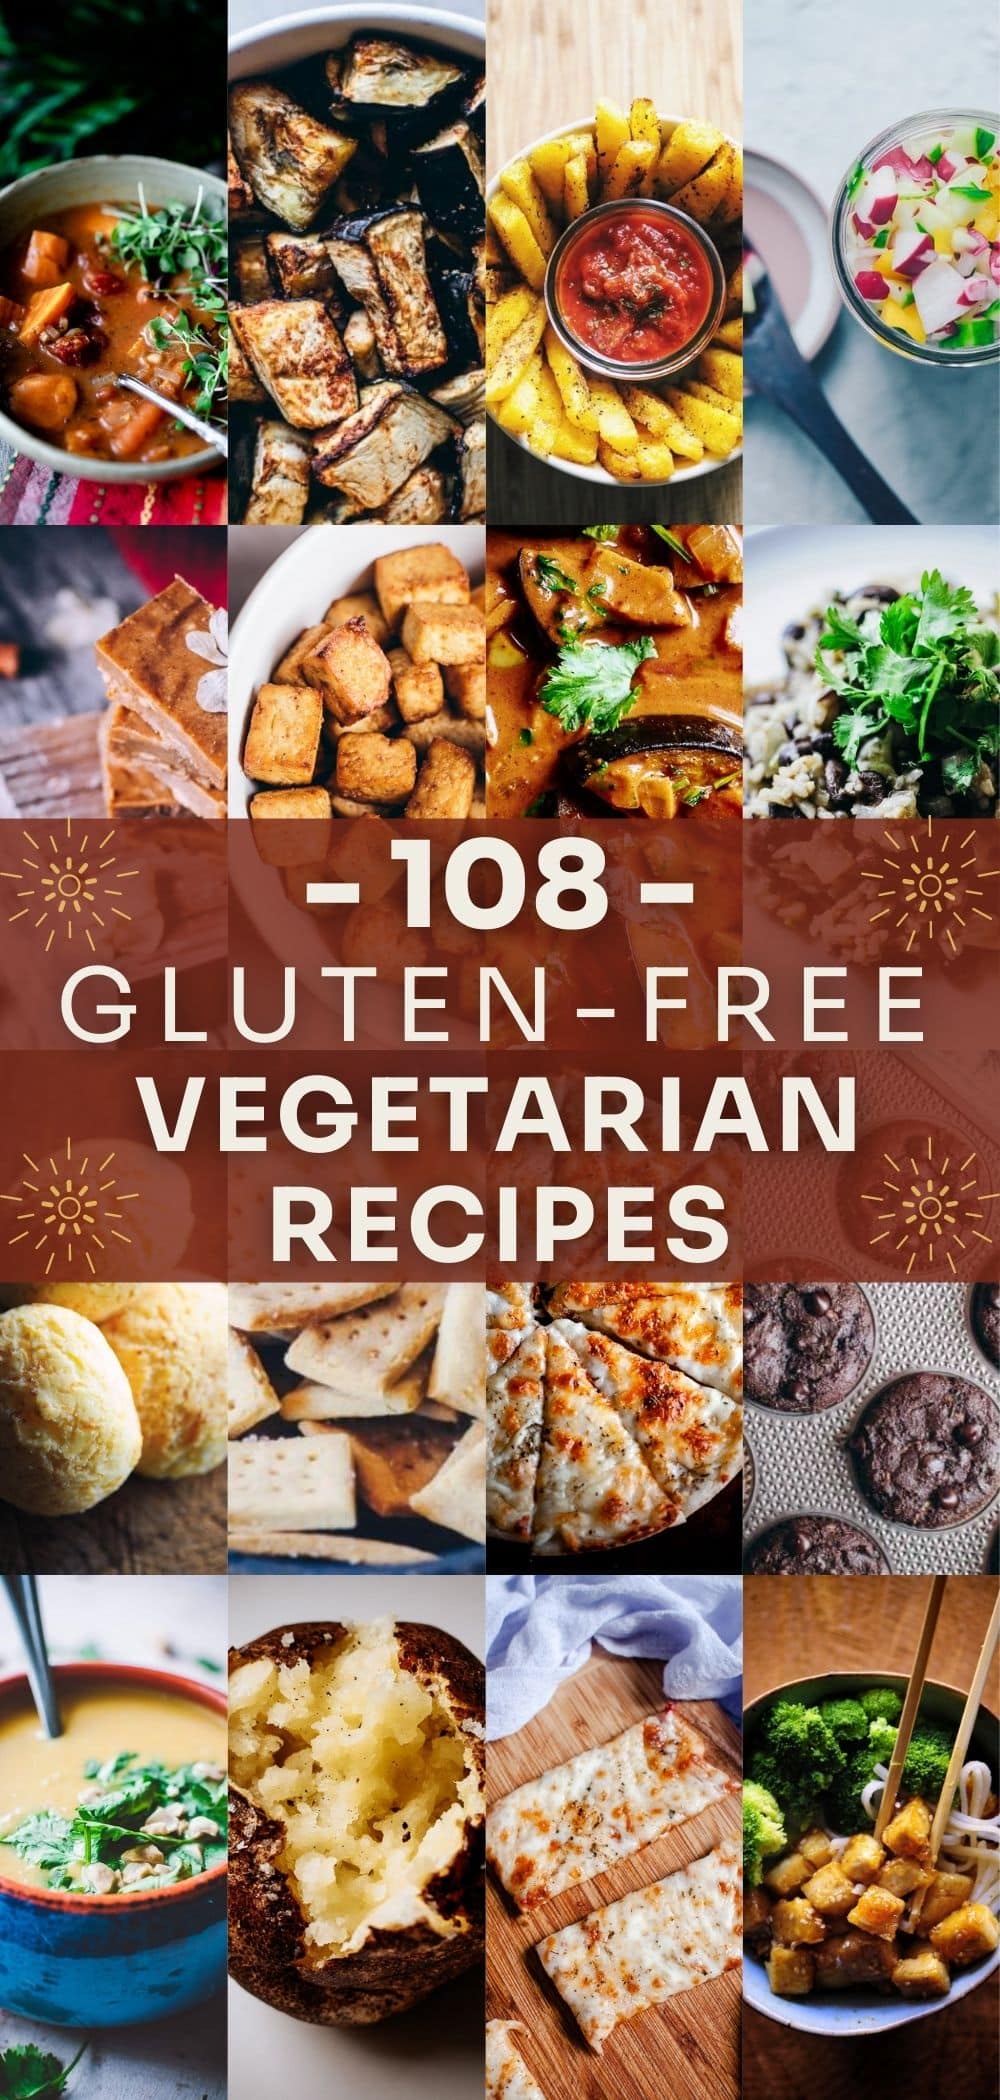 100+ Gluten Free Vegetarian Recipes - MOON and spoon and yum